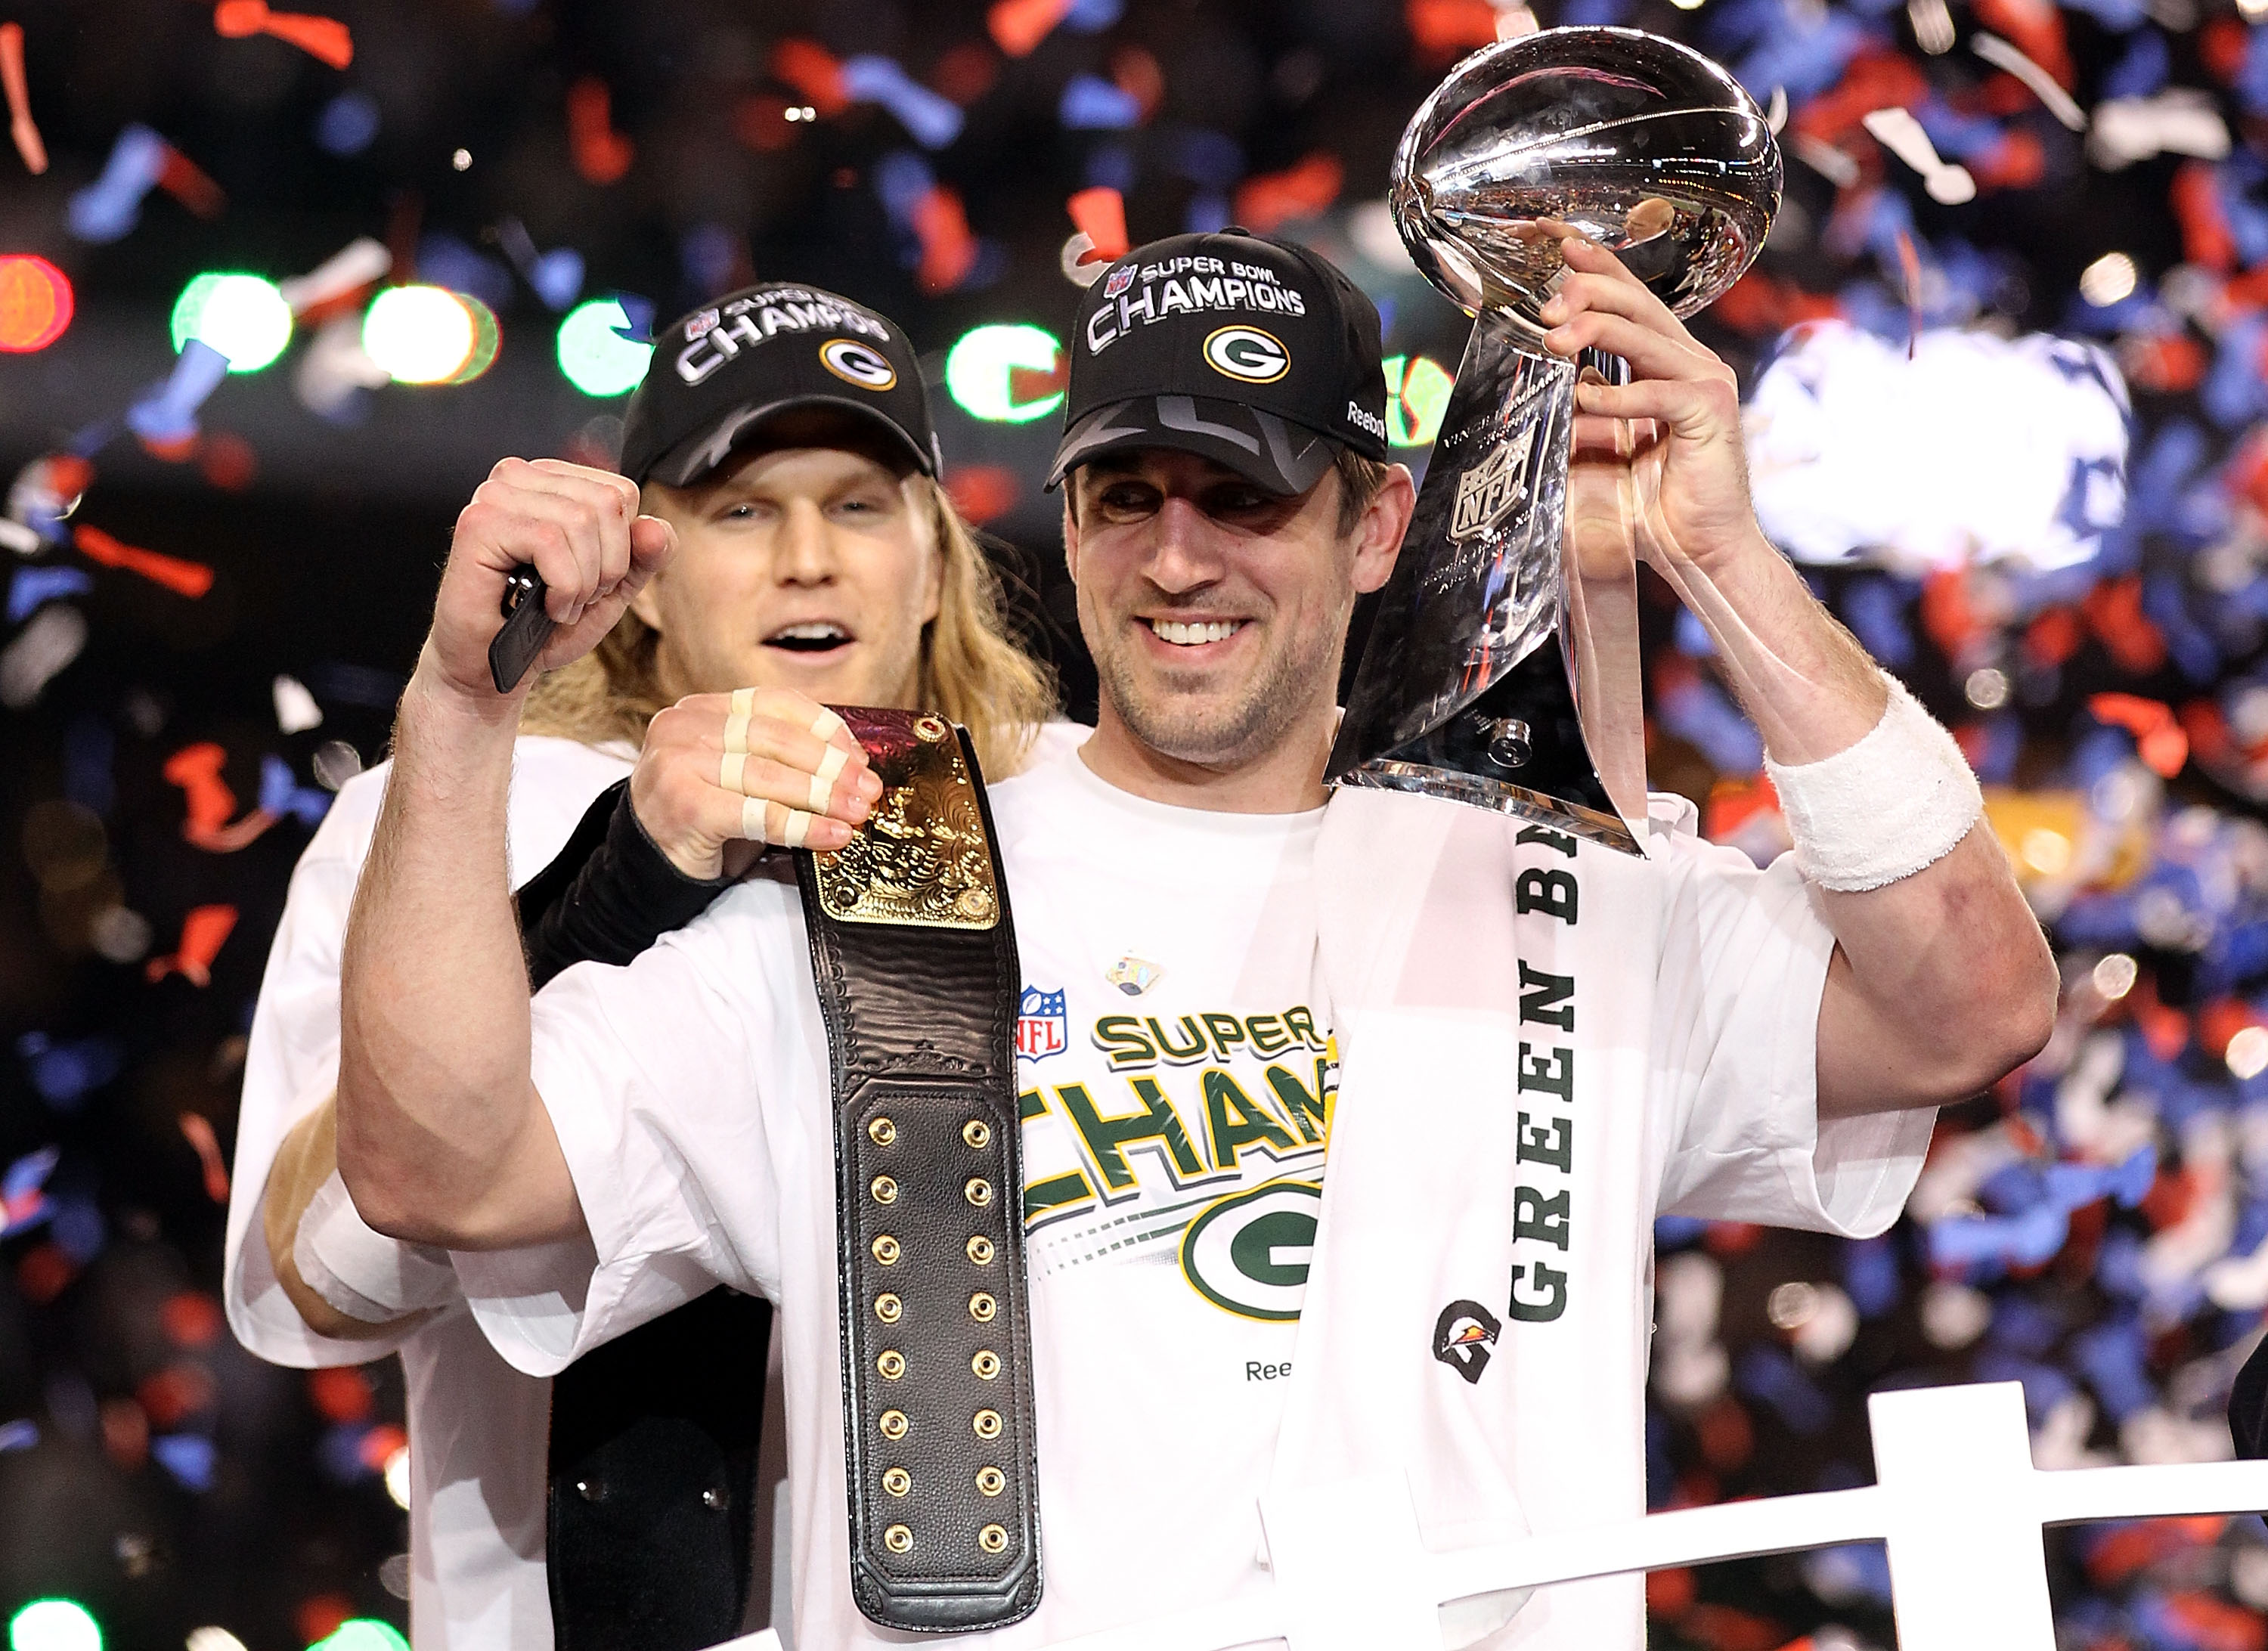 ARLINGTON, TX - FEBRUARY 06:  Super Bowl MVP Aaron Rodgers #12 of the Green Bay Packers holds up the Vince Lombardi Trophy as Clay Matthews #52 looks on after winning Super Bowl XLV 31-25 against the Pittsburgh Steelers at Cowboys Stadium on February 6, 2